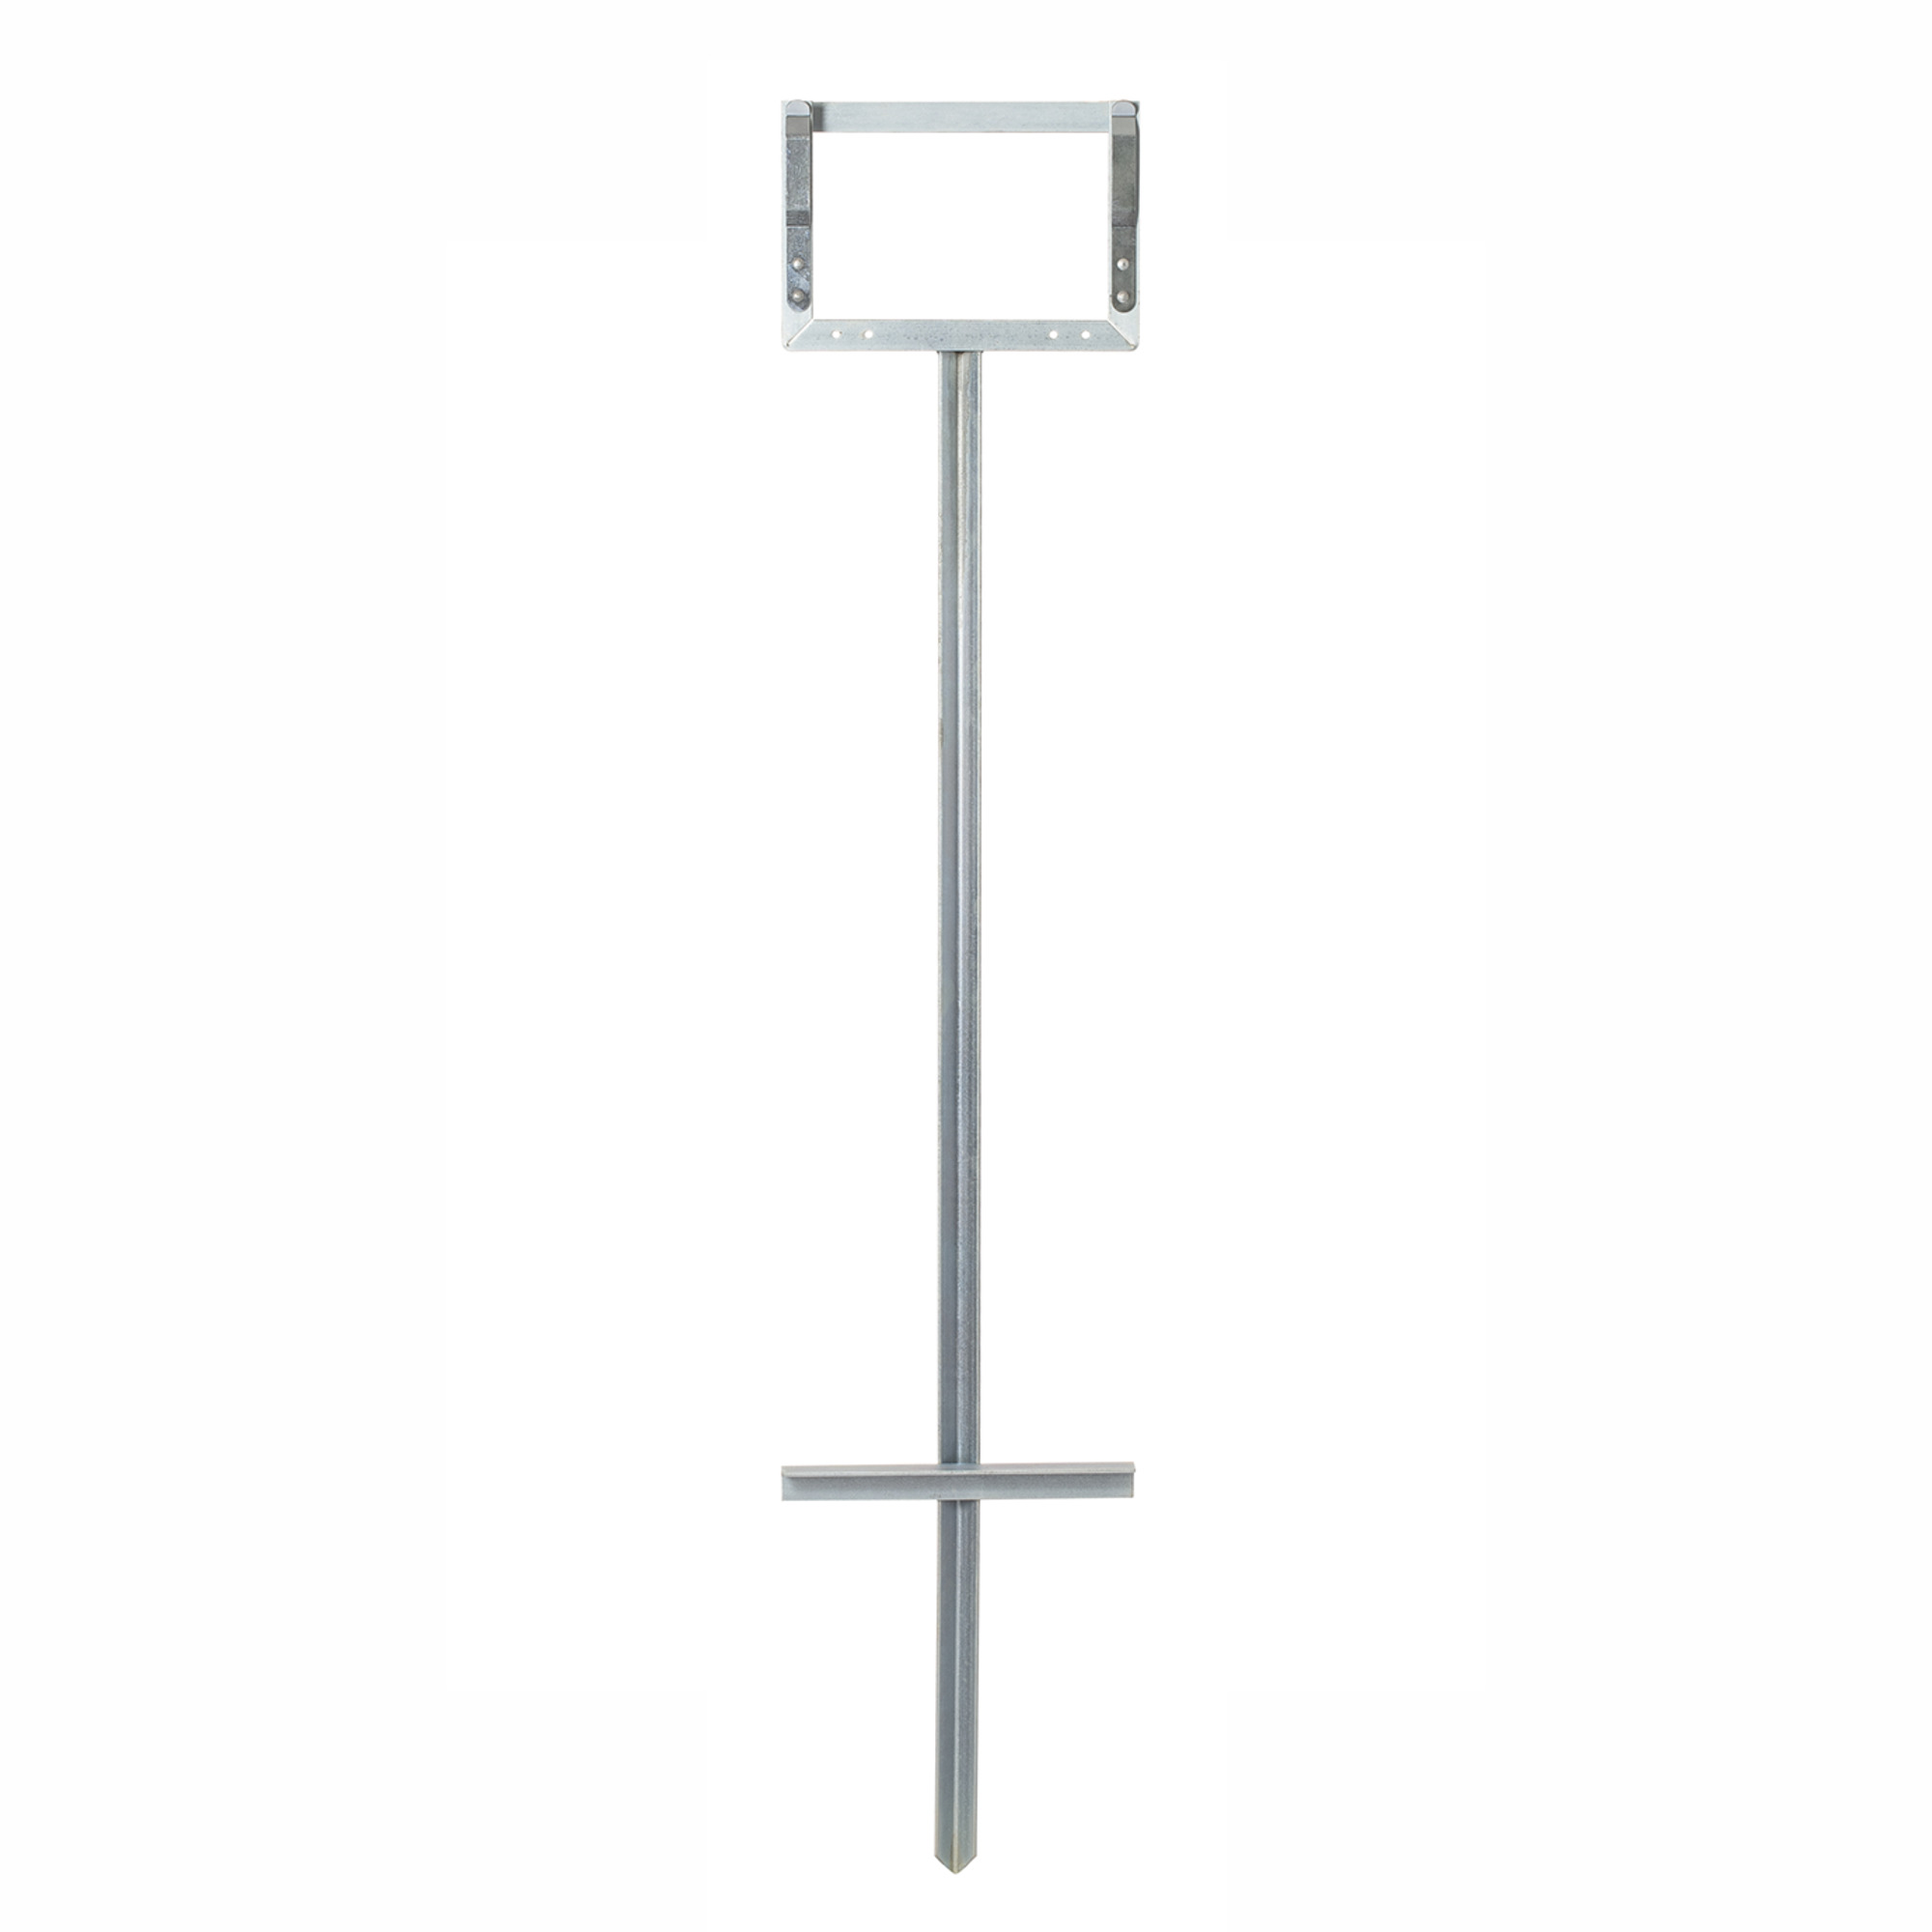 Eastern Metal Apex Pogo Sign Stand, Silver, Model PGS